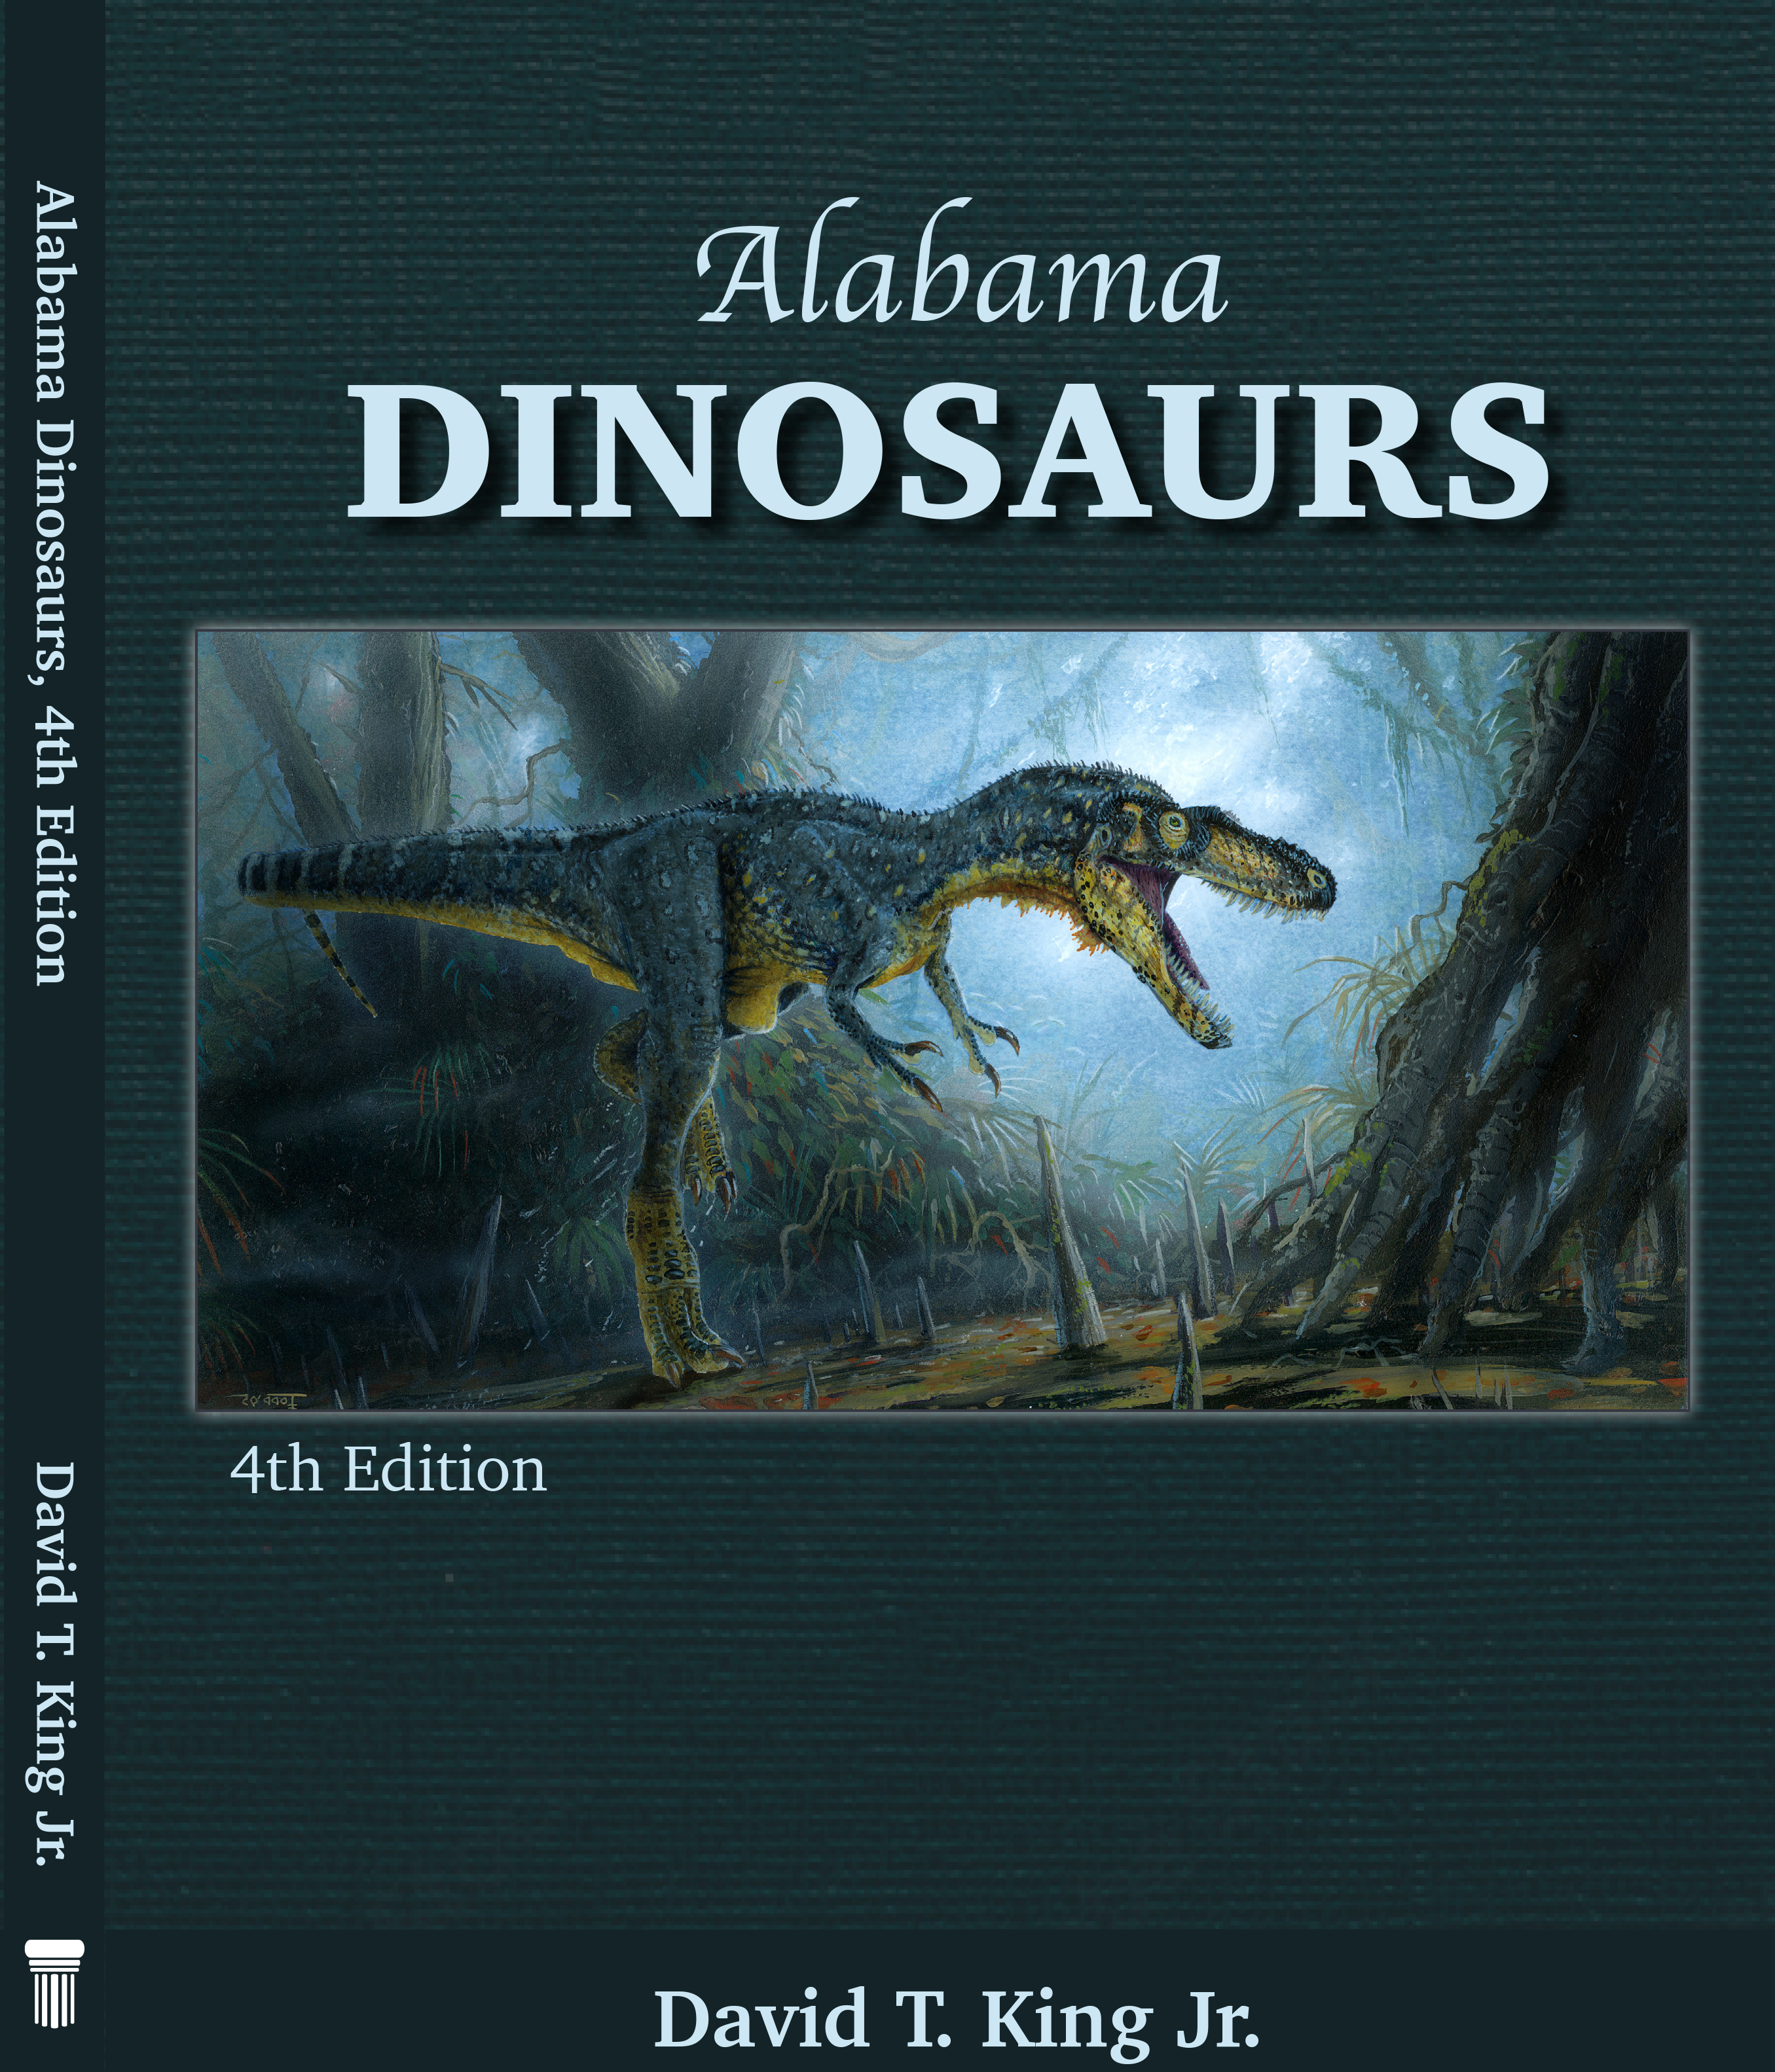 Auburn Geology professor publishes fourth edition of Alabama Dinosaurs book, expands audience to anyone with an interest in dinosaurs